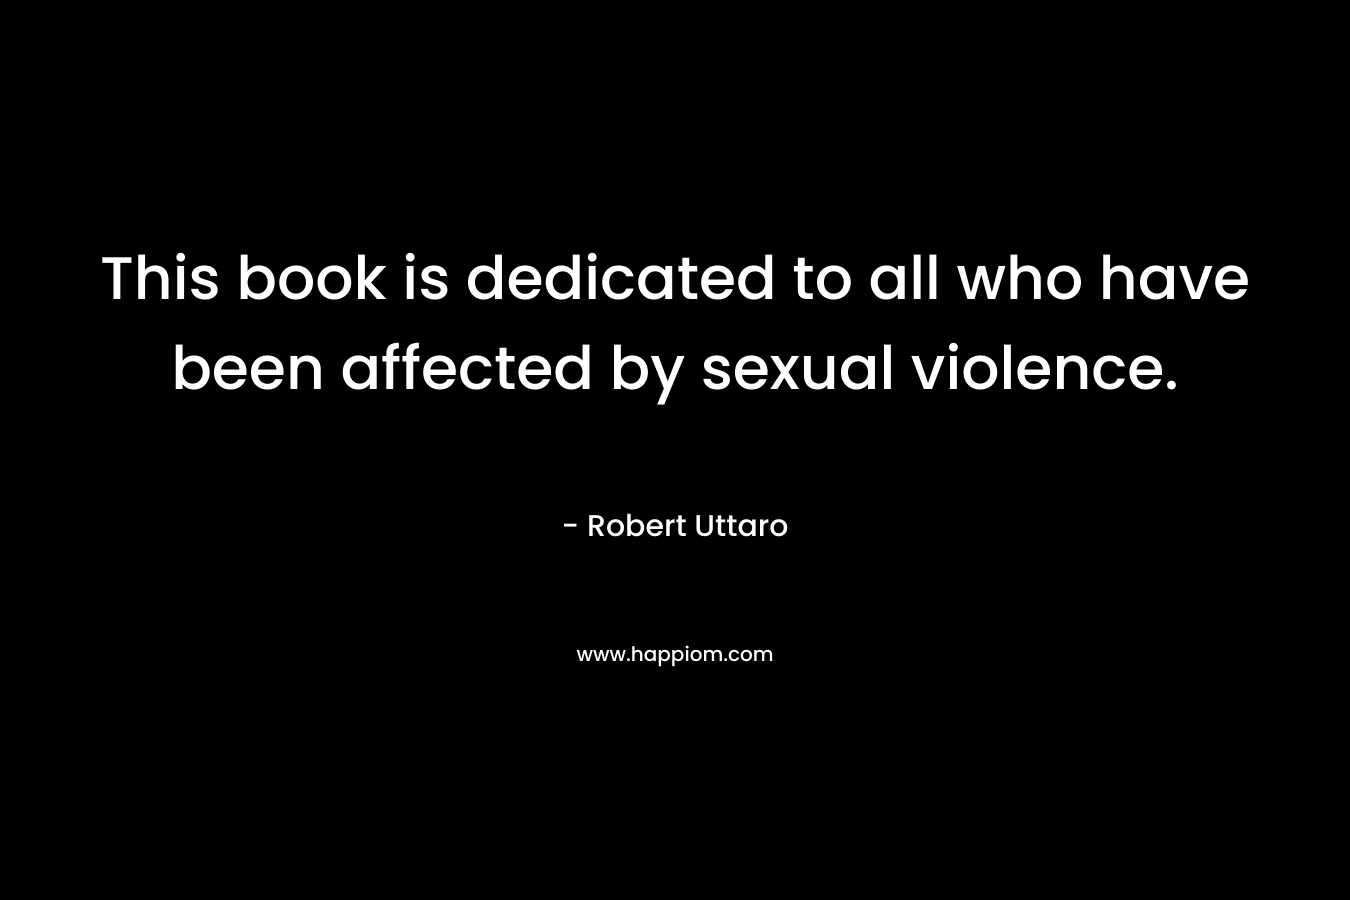 This book is dedicated to all who have been affected by sexual violence.